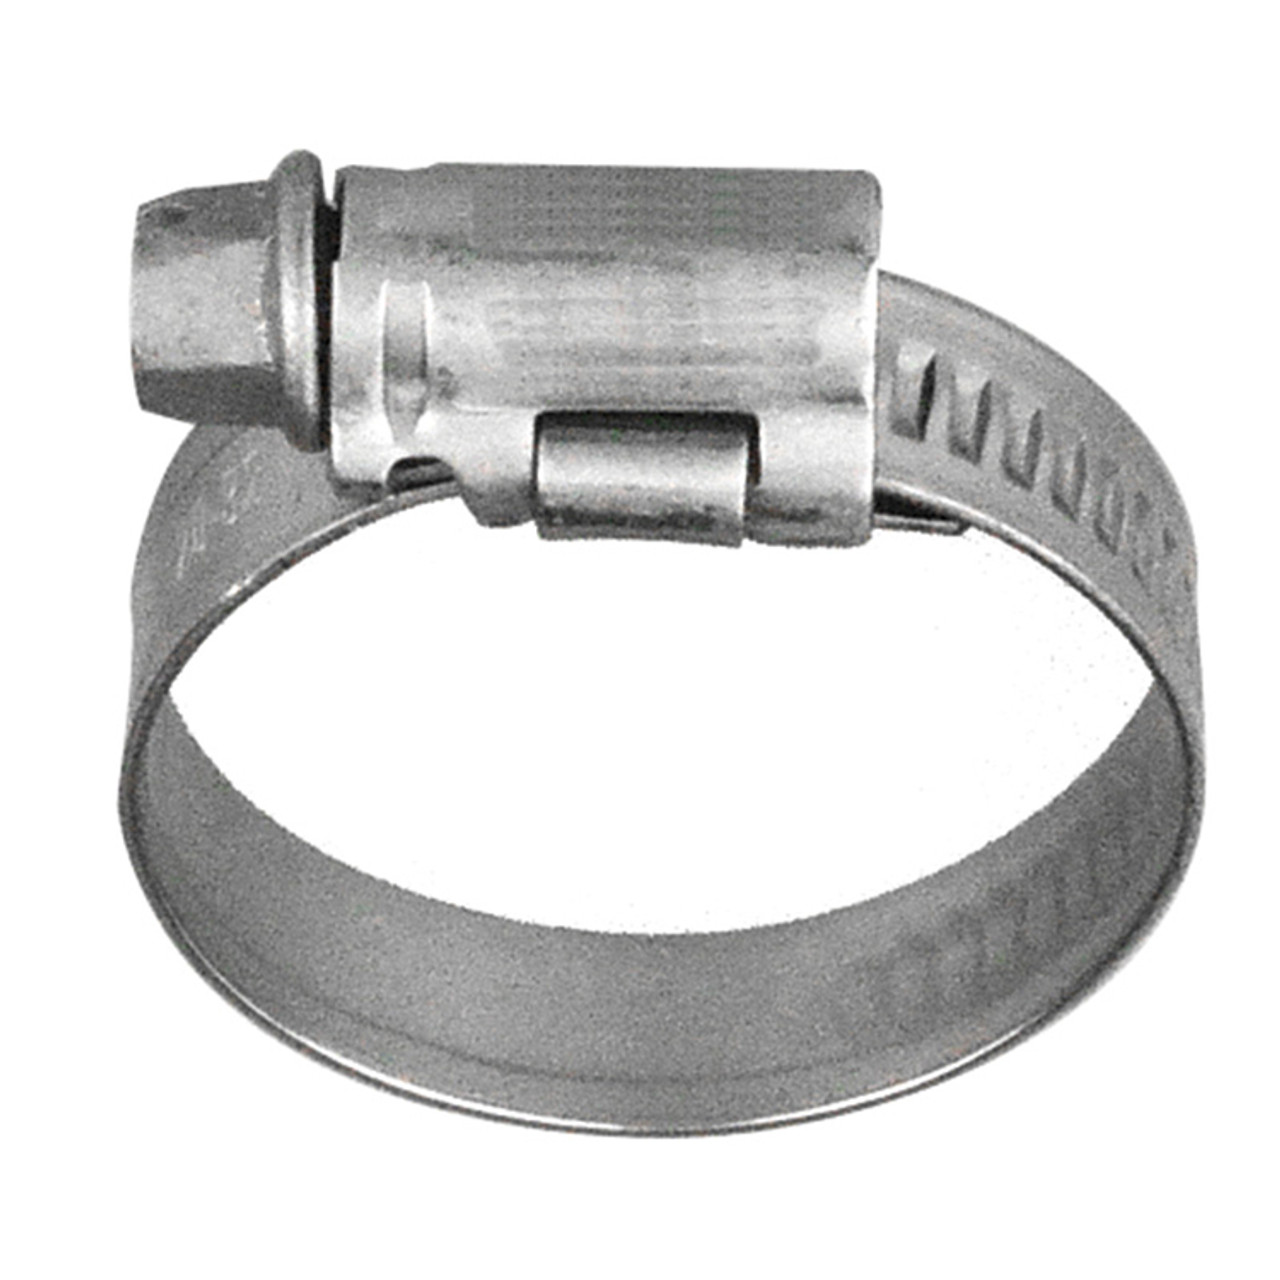 25 - 40mm Steel Worm Gear Hose Clamp   G7A-2540